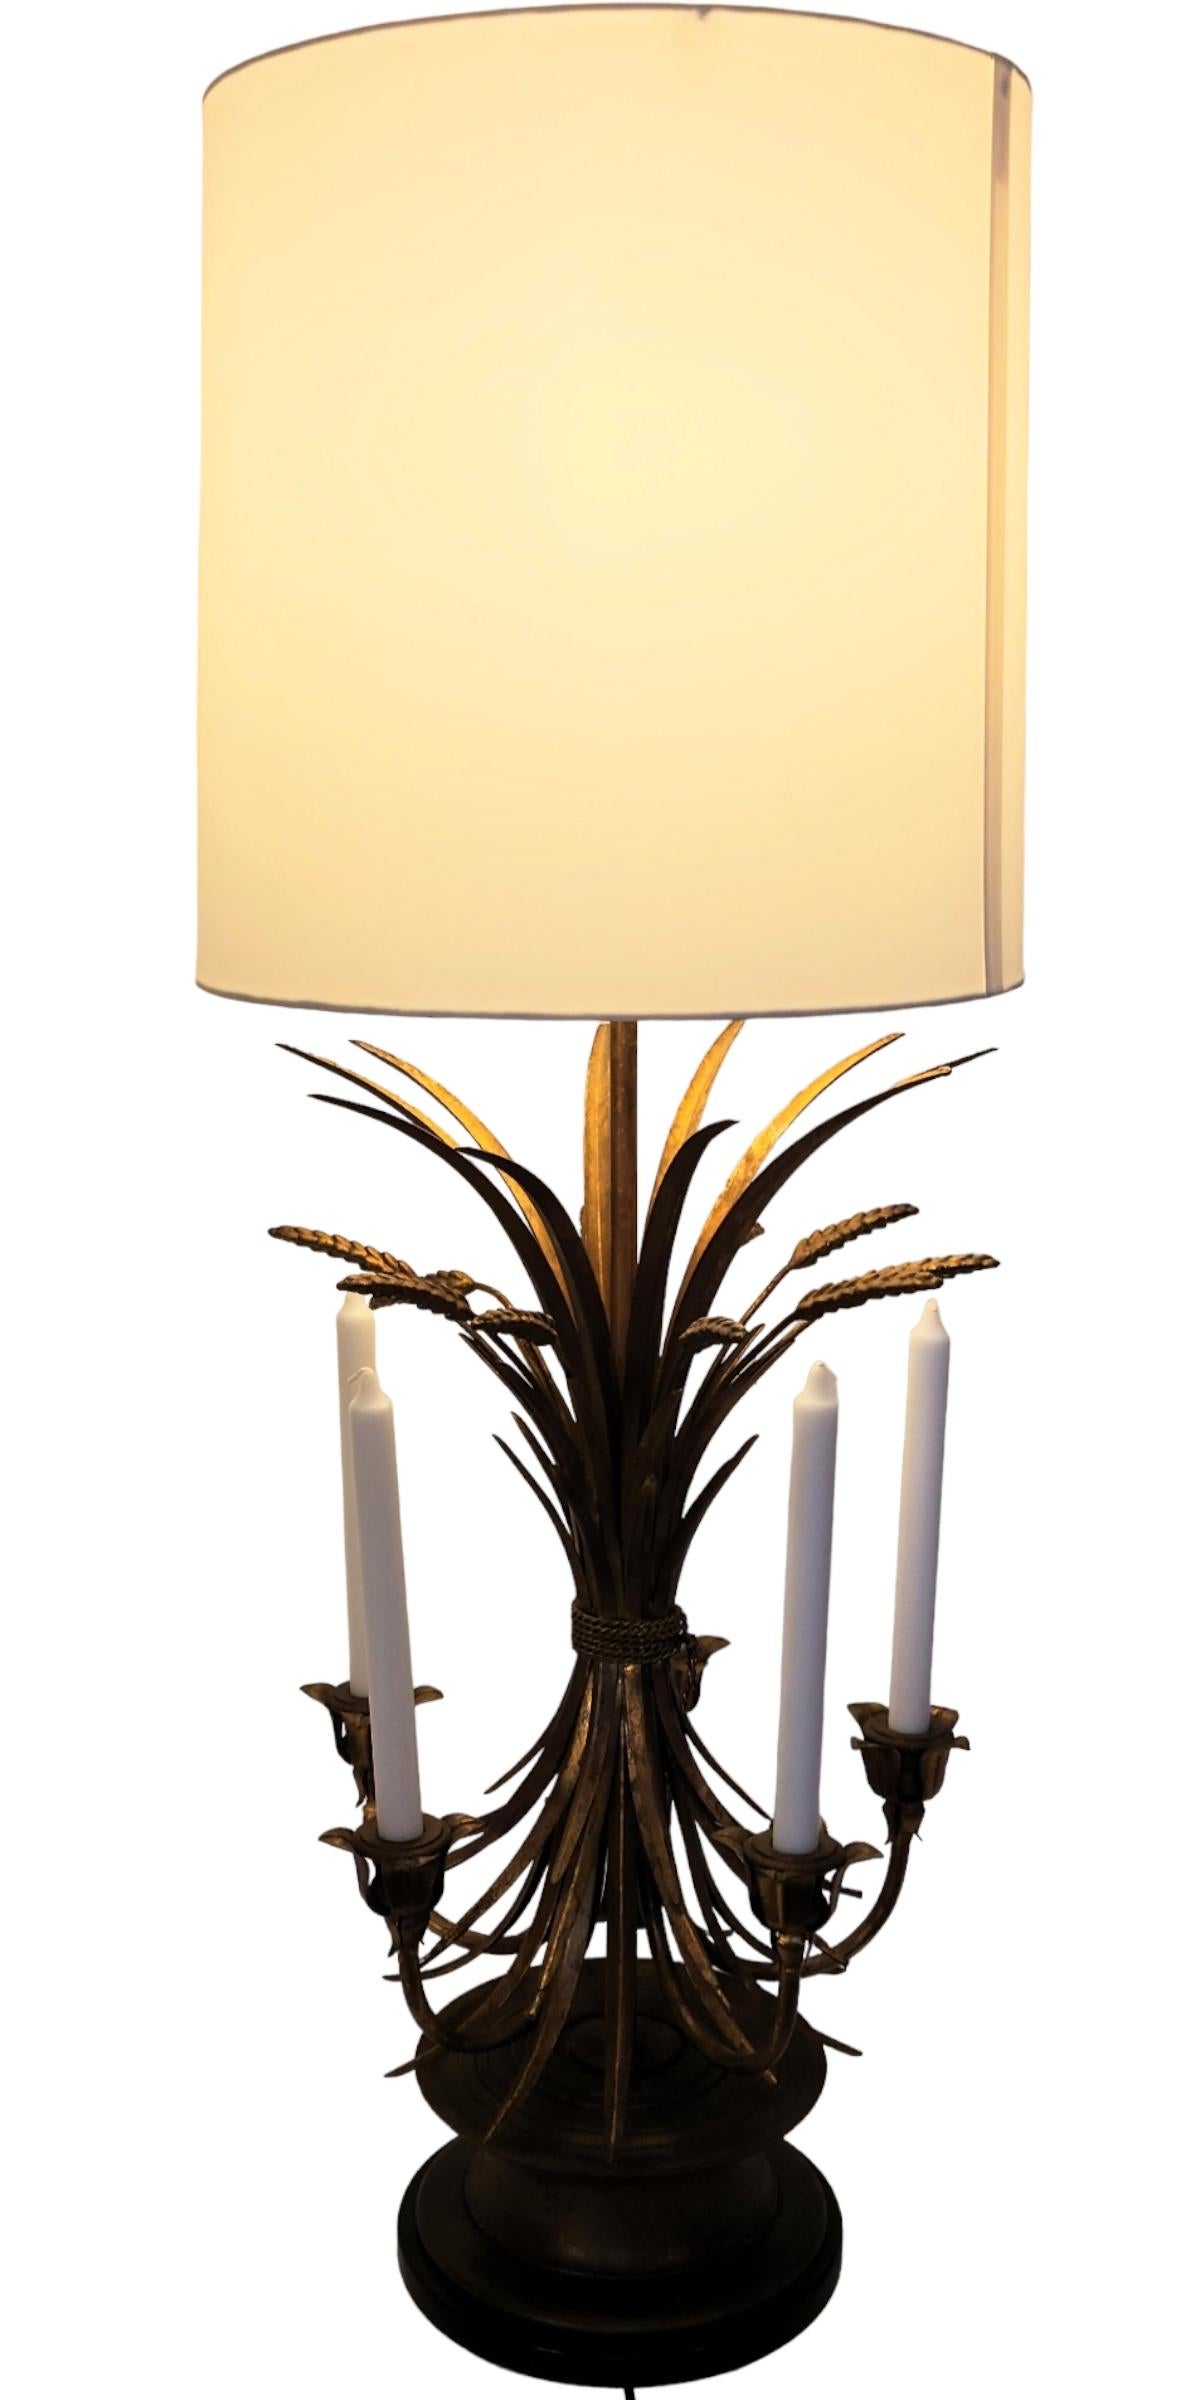 A neoclassic Italianate gilt sheaf of wheat five candle table lamp by Frederick Cooper from the late 1950s-early 1960s. 
The gilt metal body is mounted on a turned wooden spool base set on a black metal base.
The lamp has been professionally rewired